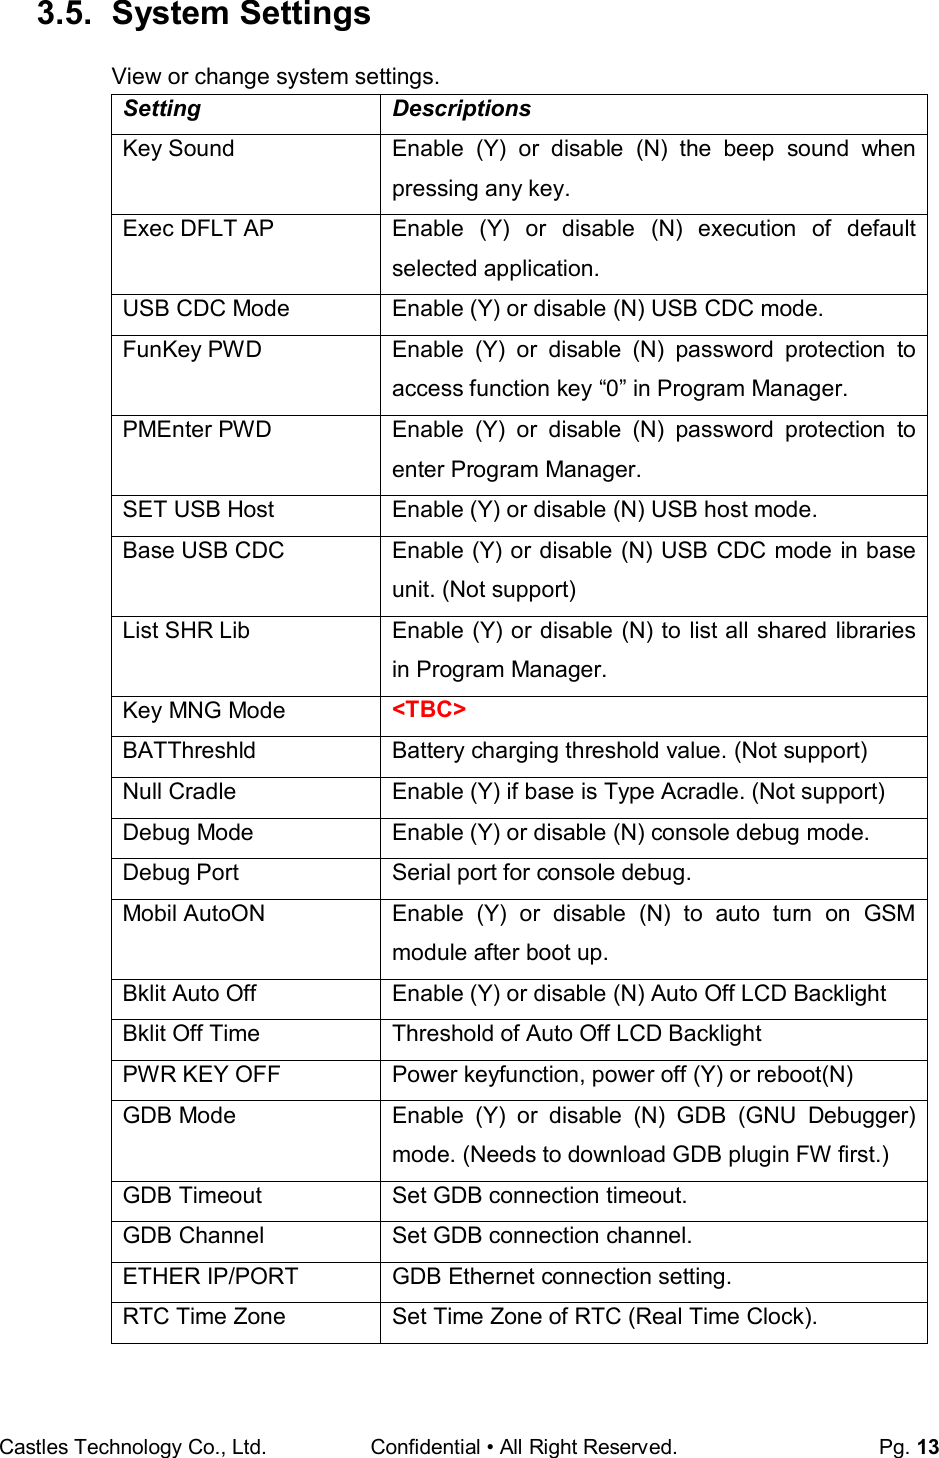 Castles Technology Co., Ltd. Confidential • All Right Reserved.  Pg. 13  3.5.  System Settings View or change system settings. Setting  Descriptions Key Sound  Enable  (Y)  or  disable  (N)  the  beep  sound  when pressing any key. Exec DFLT AP  Enable  (Y)  or  disable  (N)  execution  of  default selected application. USB CDC Mode  Enable (Y) or disable (N) USB CDC mode. FunKey PWD  Enable  (Y)  or  disable  (N)  password  protection  to access function key “0” in Program Manager. PMEnter PWD  Enable  (Y)  or  disable  (N)  password  protection  to enter Program Manager. SET USB Host  Enable (Y) or disable (N) USB host mode. Base USB CDC  Enable (Y) or disable (N) USB CDC mode in base unit. (Not support) List SHR Lib  Enable (Y) or disable (N) to list all shared libraries in Program Manager. Key MNG Mode &lt;TBC&gt; BATThreshld  Battery charging threshold value. (Not support) Null Cradle  Enable (Y) if base is Type Acradle. (Not support) Debug Mode  Enable (Y) or disable (N) console debug mode. Debug Port  Serial port for console debug. Mobil AutoON  Enable  (Y)  or  disable  (N)  to  auto  turn  on  GSM module after boot up. Bklit Auto Off  Enable (Y) or disable (N) Auto Off LCD Backlight Bklit Off Time  Threshold of Auto Off LCD Backlight PWR KEY OFF  Power keyfunction, power off (Y) or reboot(N)  GDB Mode  Enable  (Y)  or  disable  (N)  GDB  (GNU  Debugger) mode. (Needs to download GDB plugin FW first.) GDB Timeout  Set GDB connection timeout. GDB Channel  Set GDB connection channel. ETHER IP/PORT  GDB Ethernet connection setting. RTC Time Zone  Set Time Zone of RTC (Real Time Clock). 